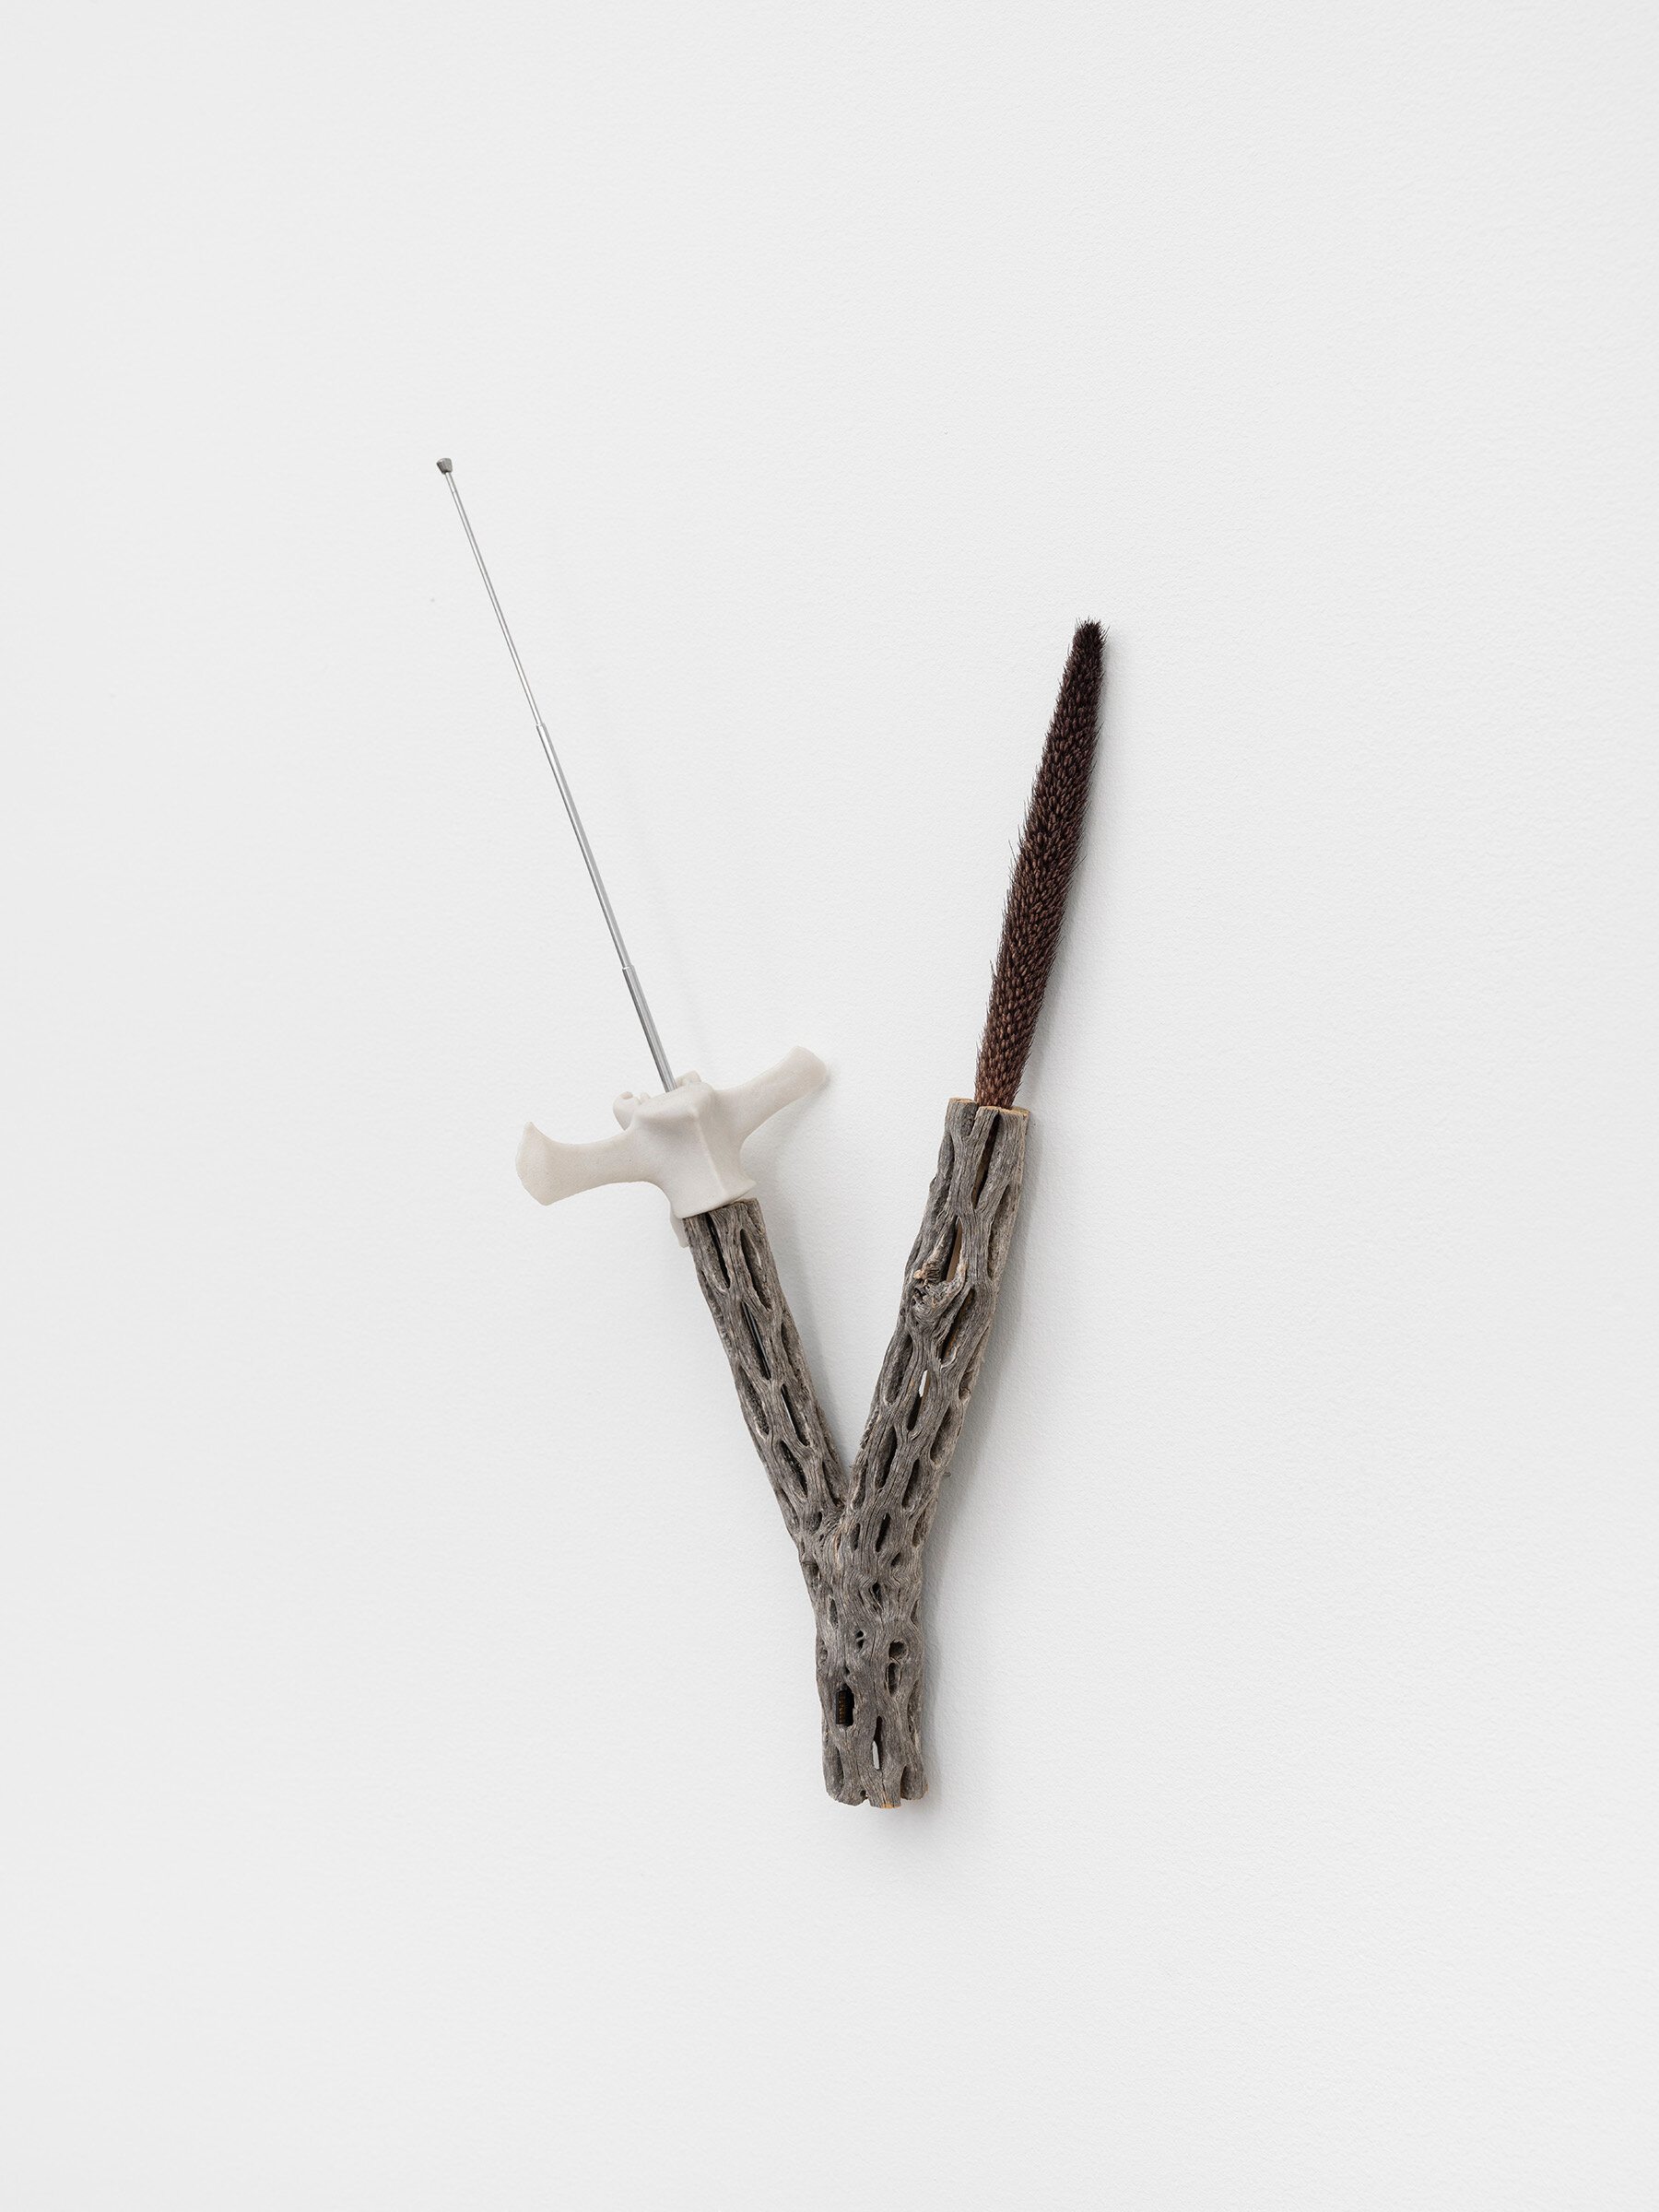  Connor McNicholas  The Many Pieces as Ever , 2020 Polyamide, SD card, wood, pearl millet, antenna, hardware  16 x 8 inches (41 x 20 cm) 